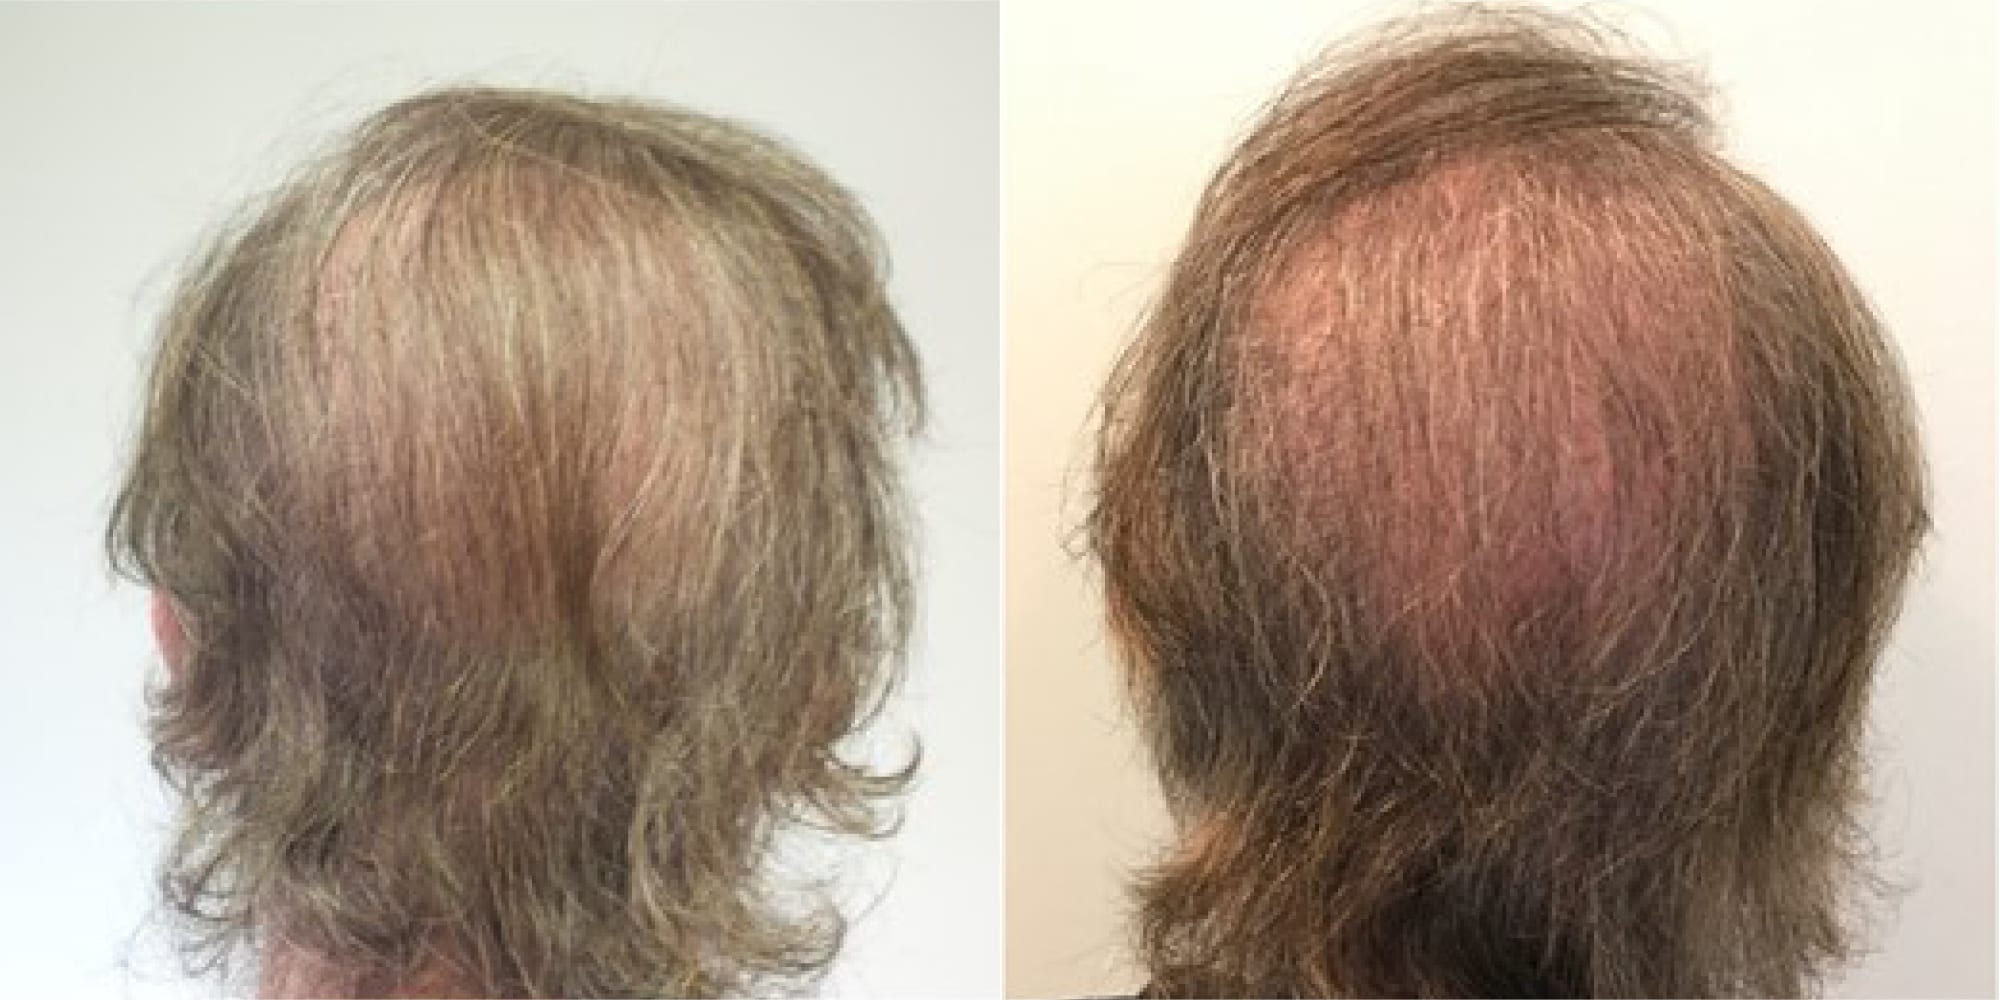 hair restoration before and after hughes center